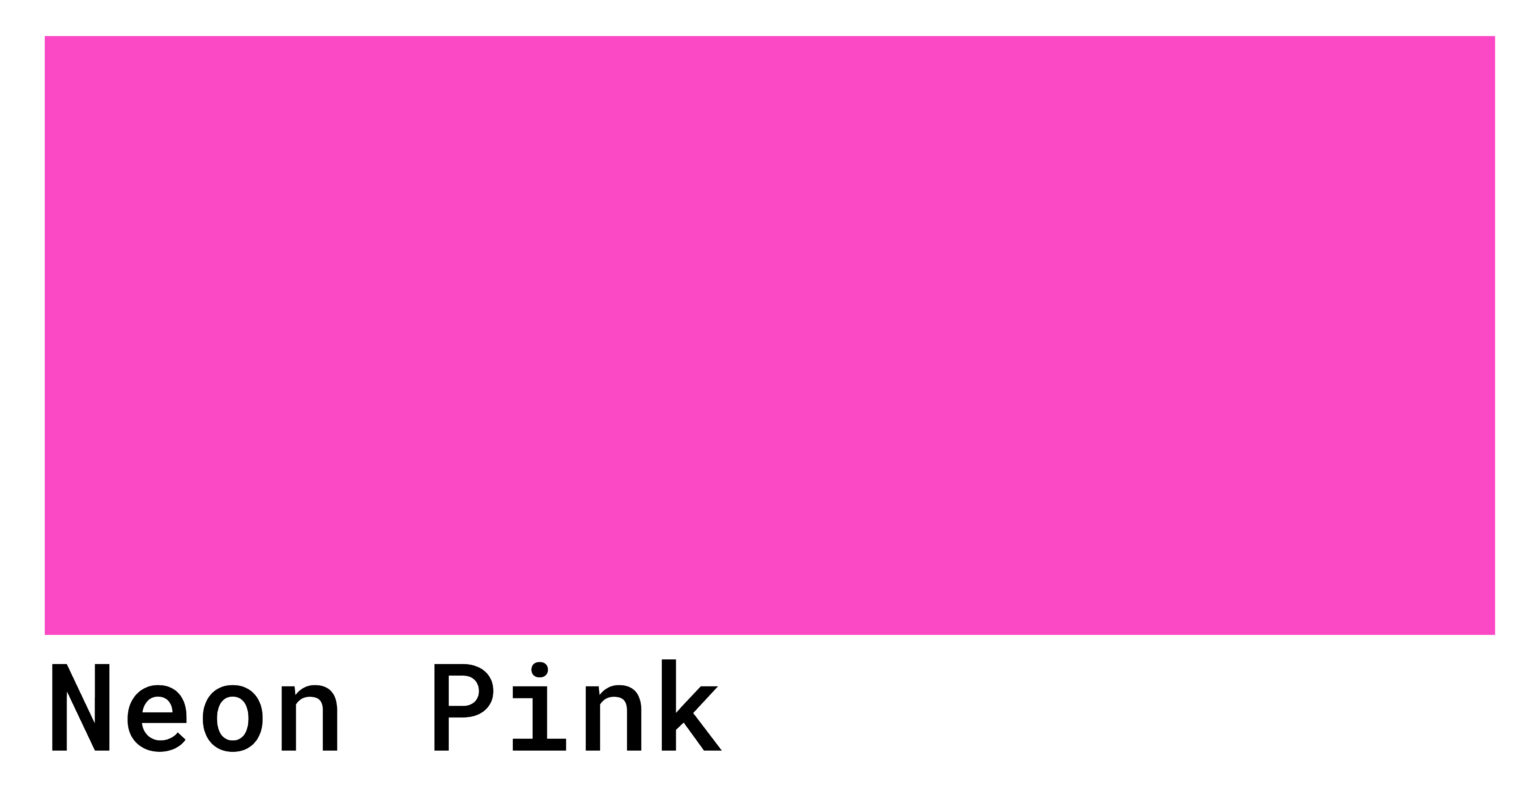 Neon Pink Color Codes - The Hex, RGB and CMYK Values That You Need